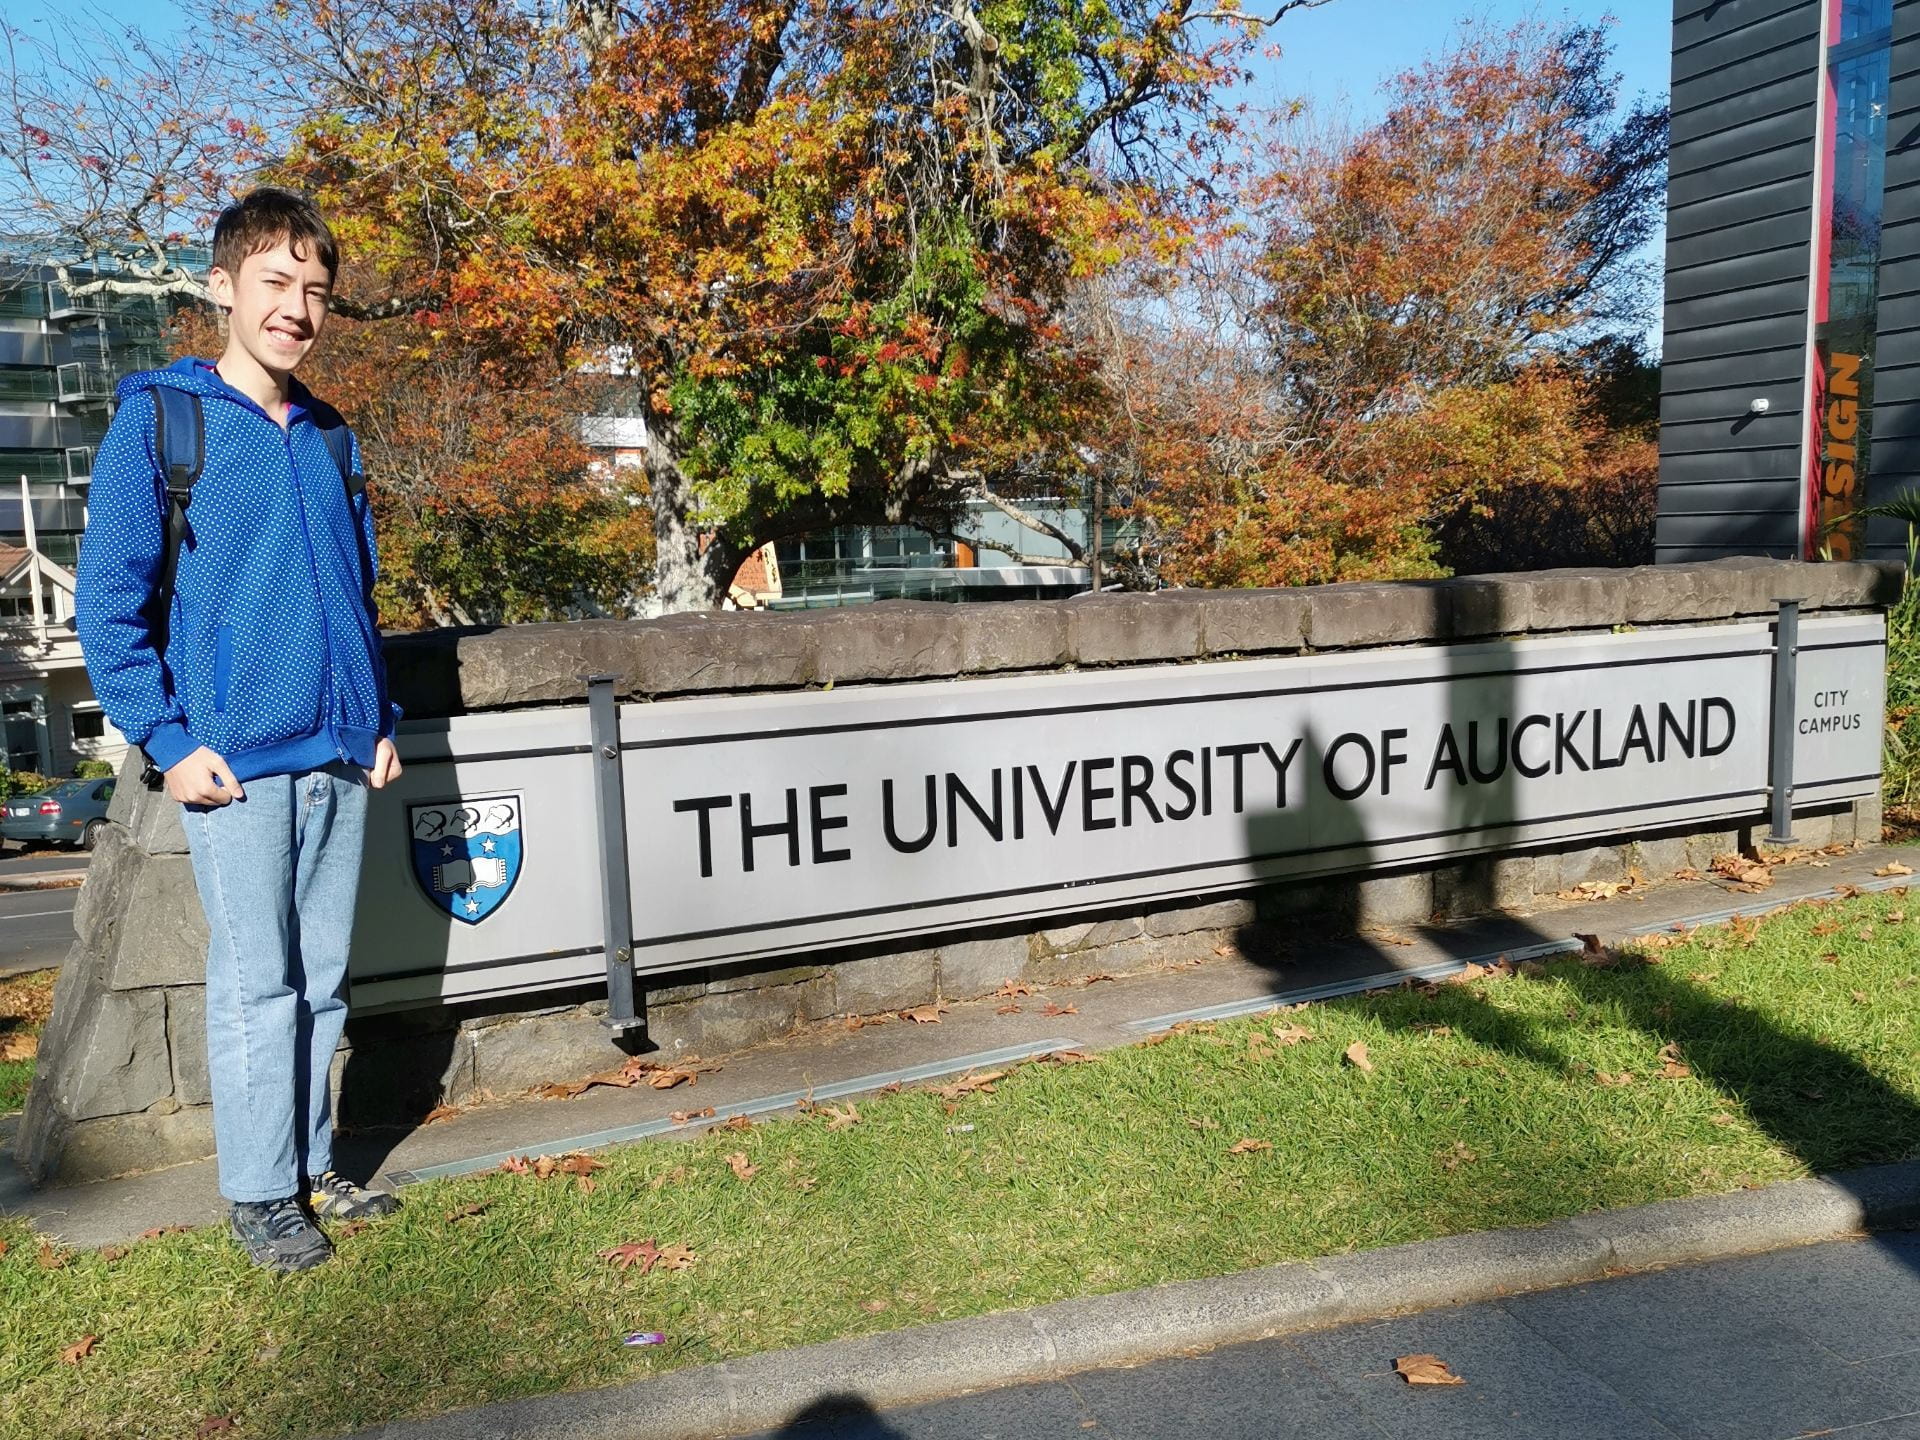 Me by UoA sign